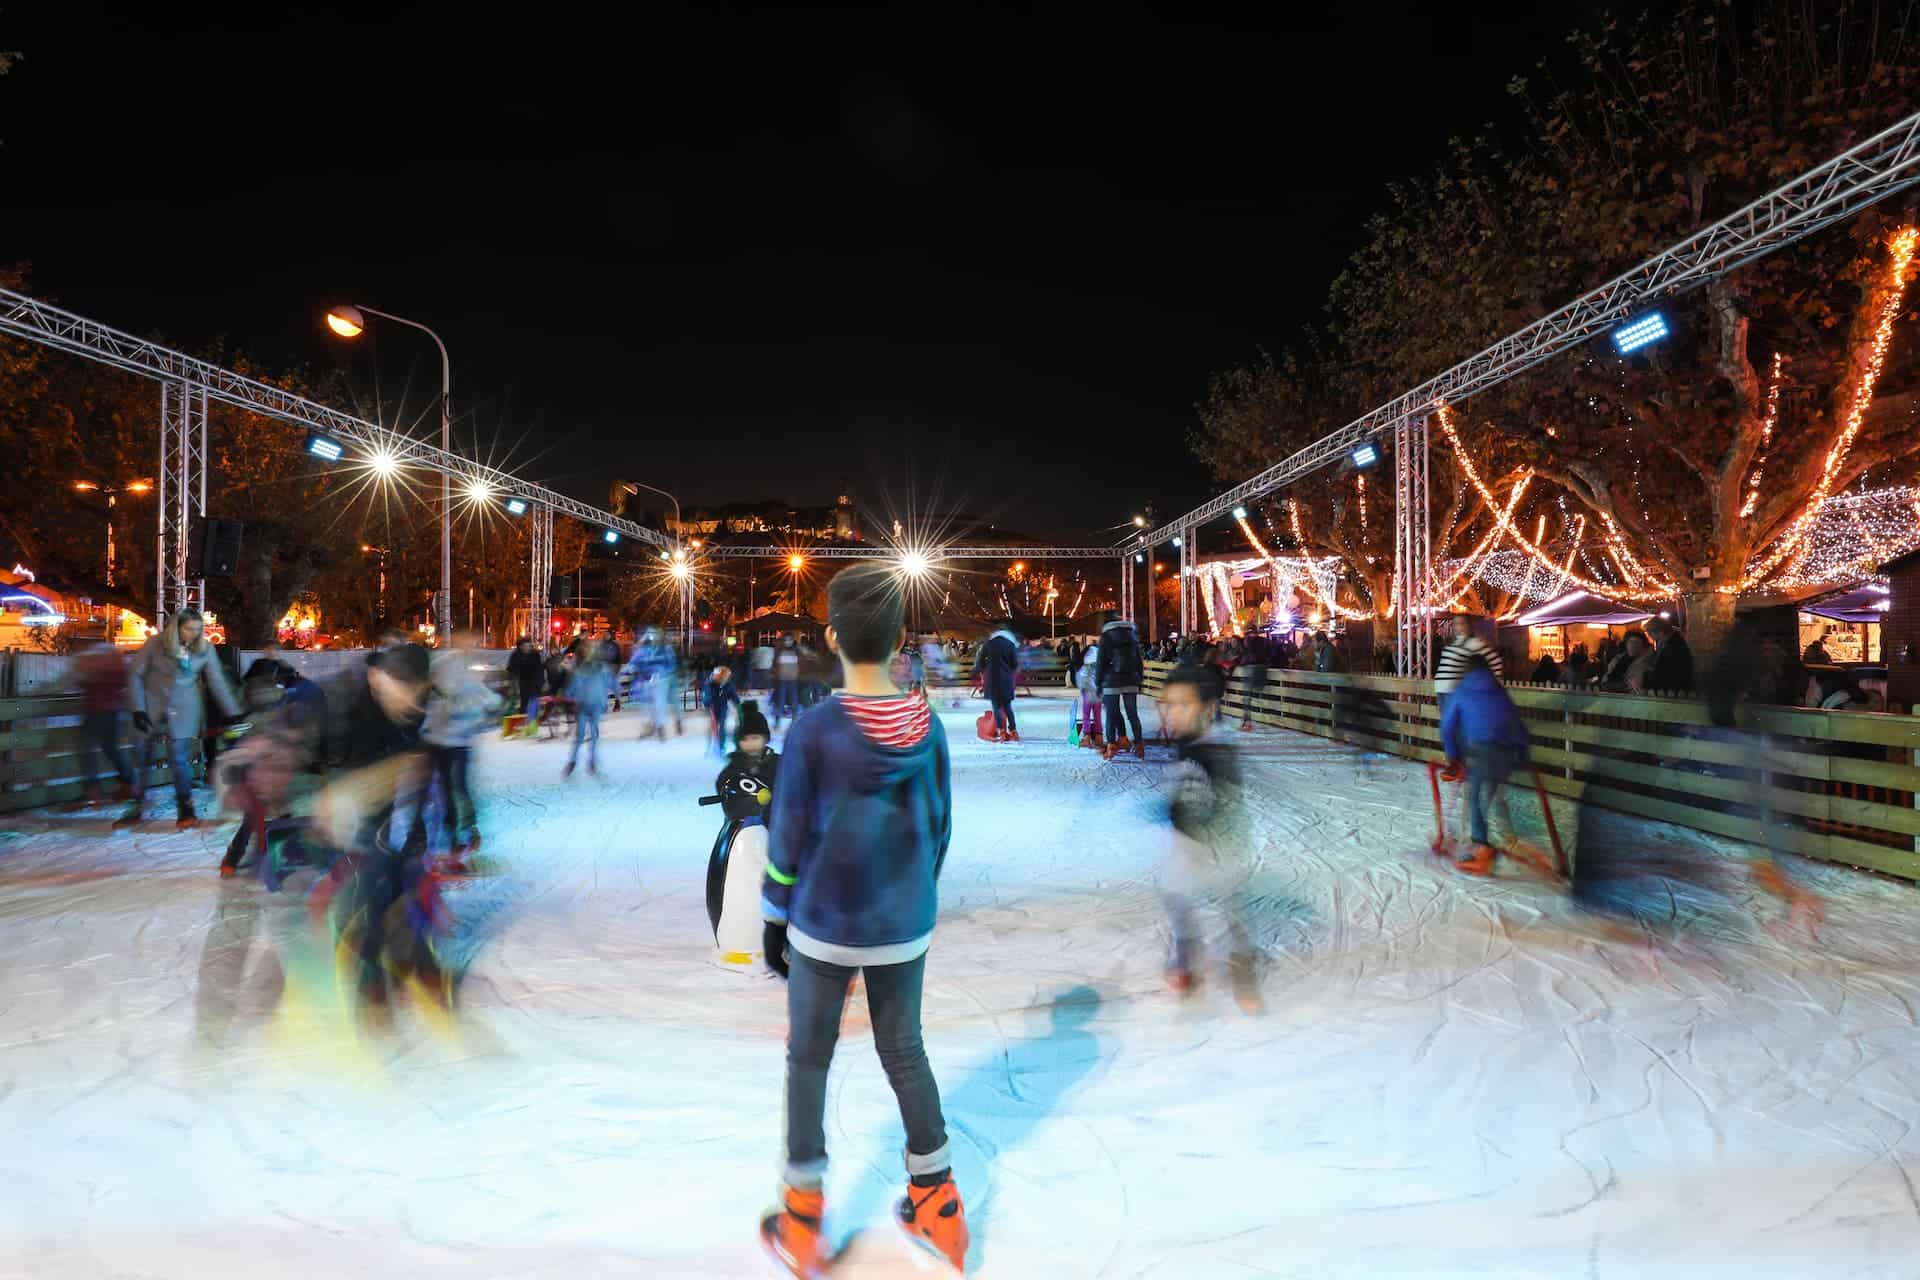 The ice rink